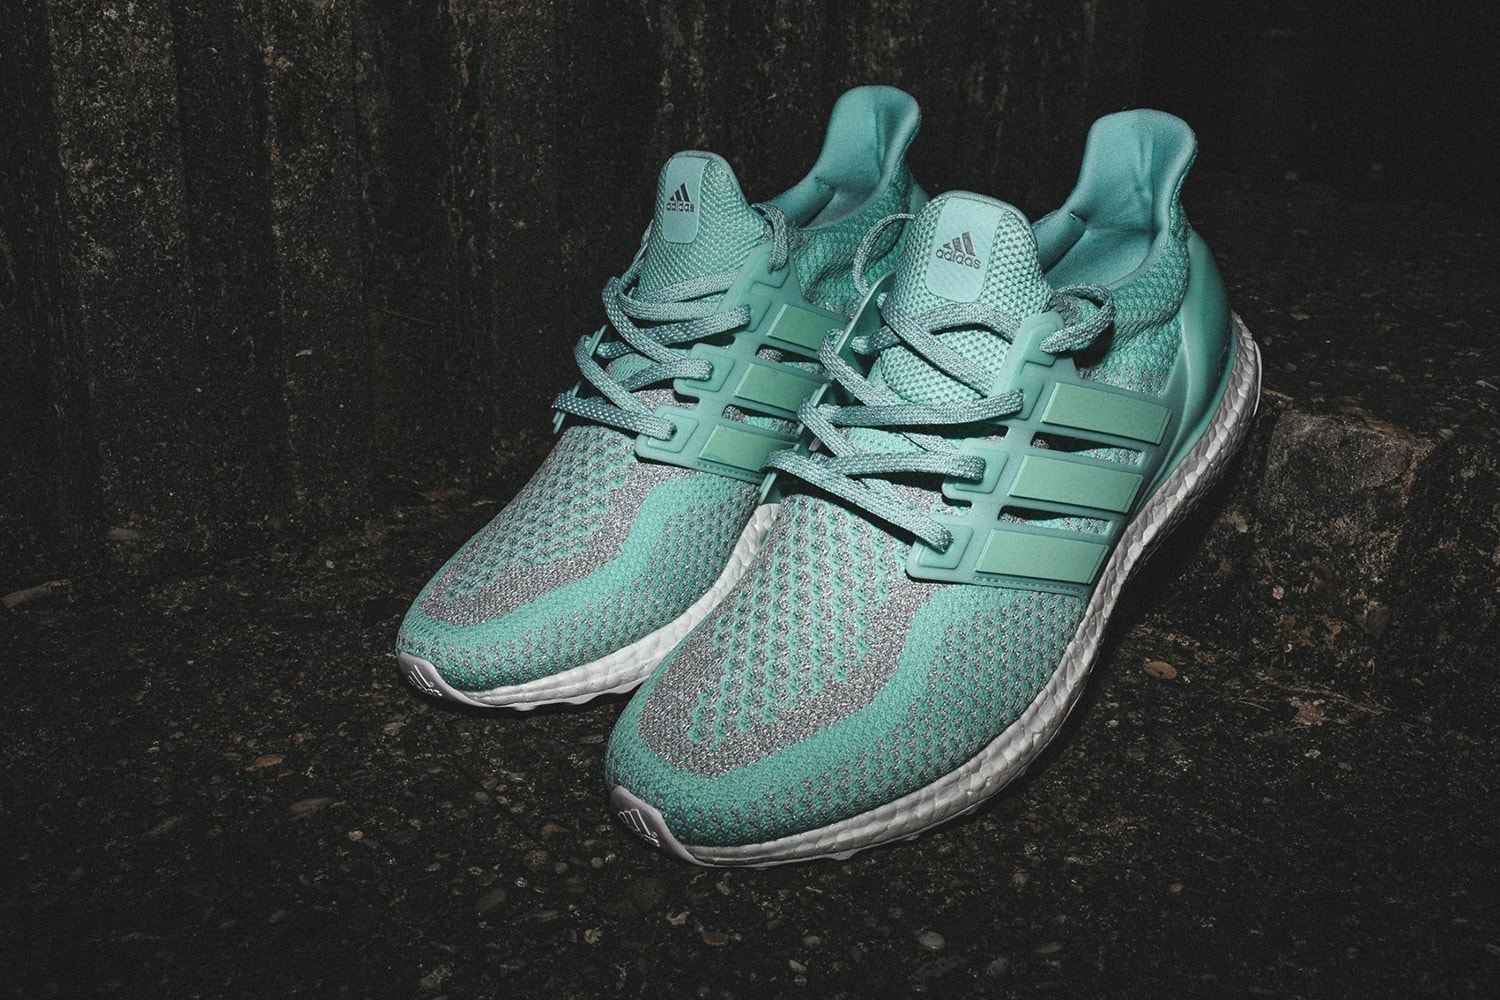 adidas' miUltraBOOST NYC-Exclusive "Stature of Liberty" Edition Three Stripes BOOST Technology New York City Flagship Store